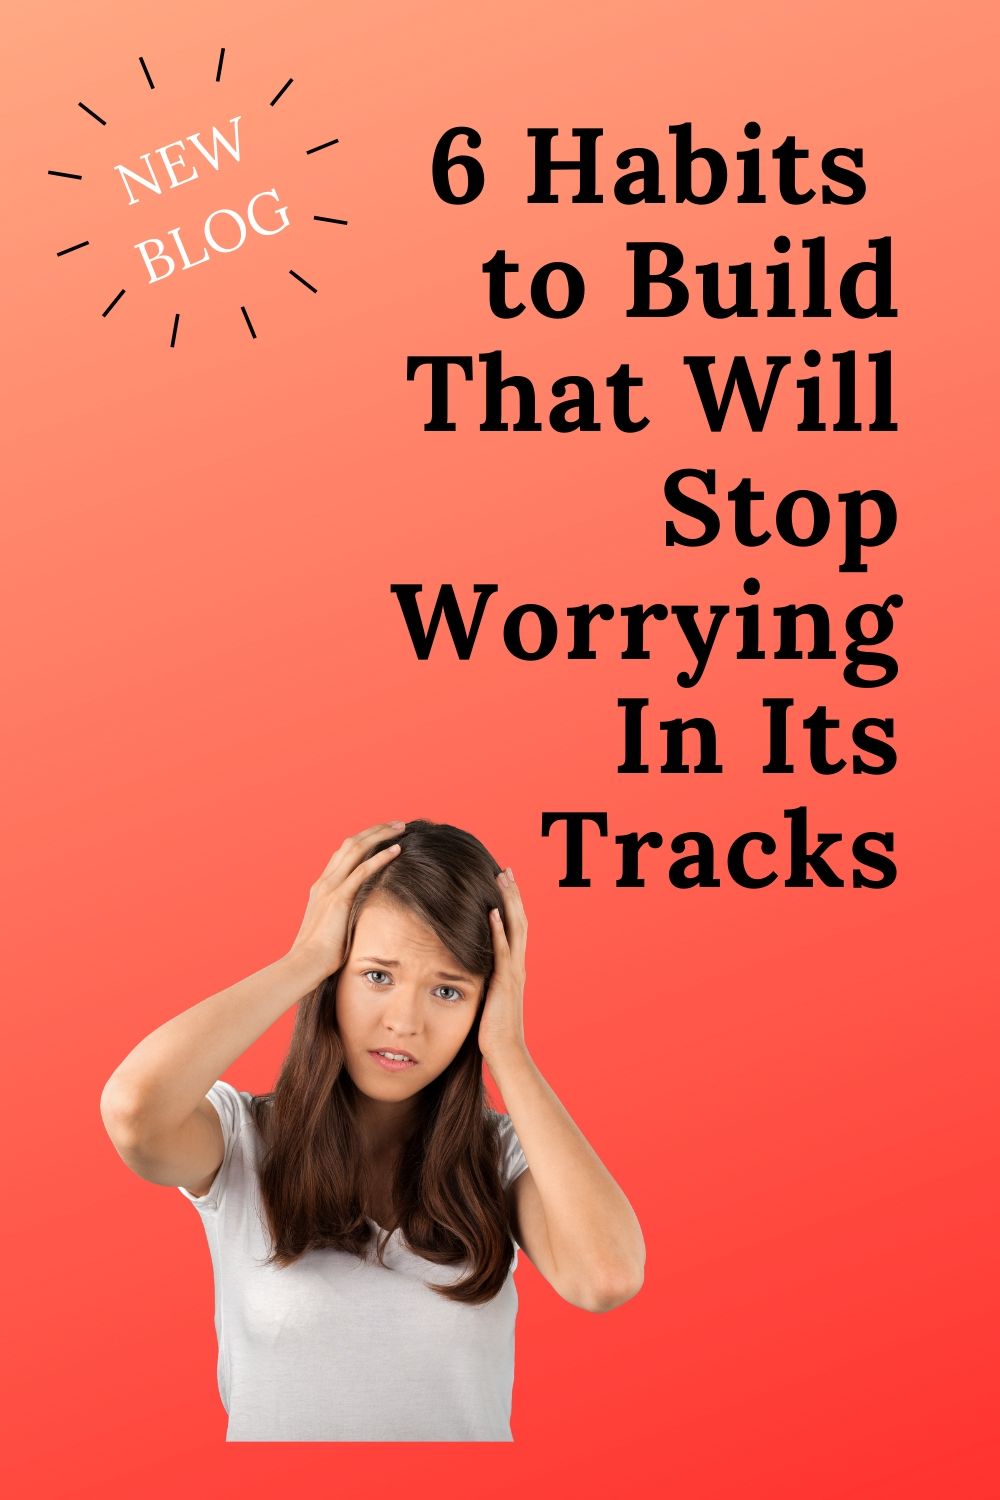 6 Habits to Build that Will Stop Worrying in its Tracks